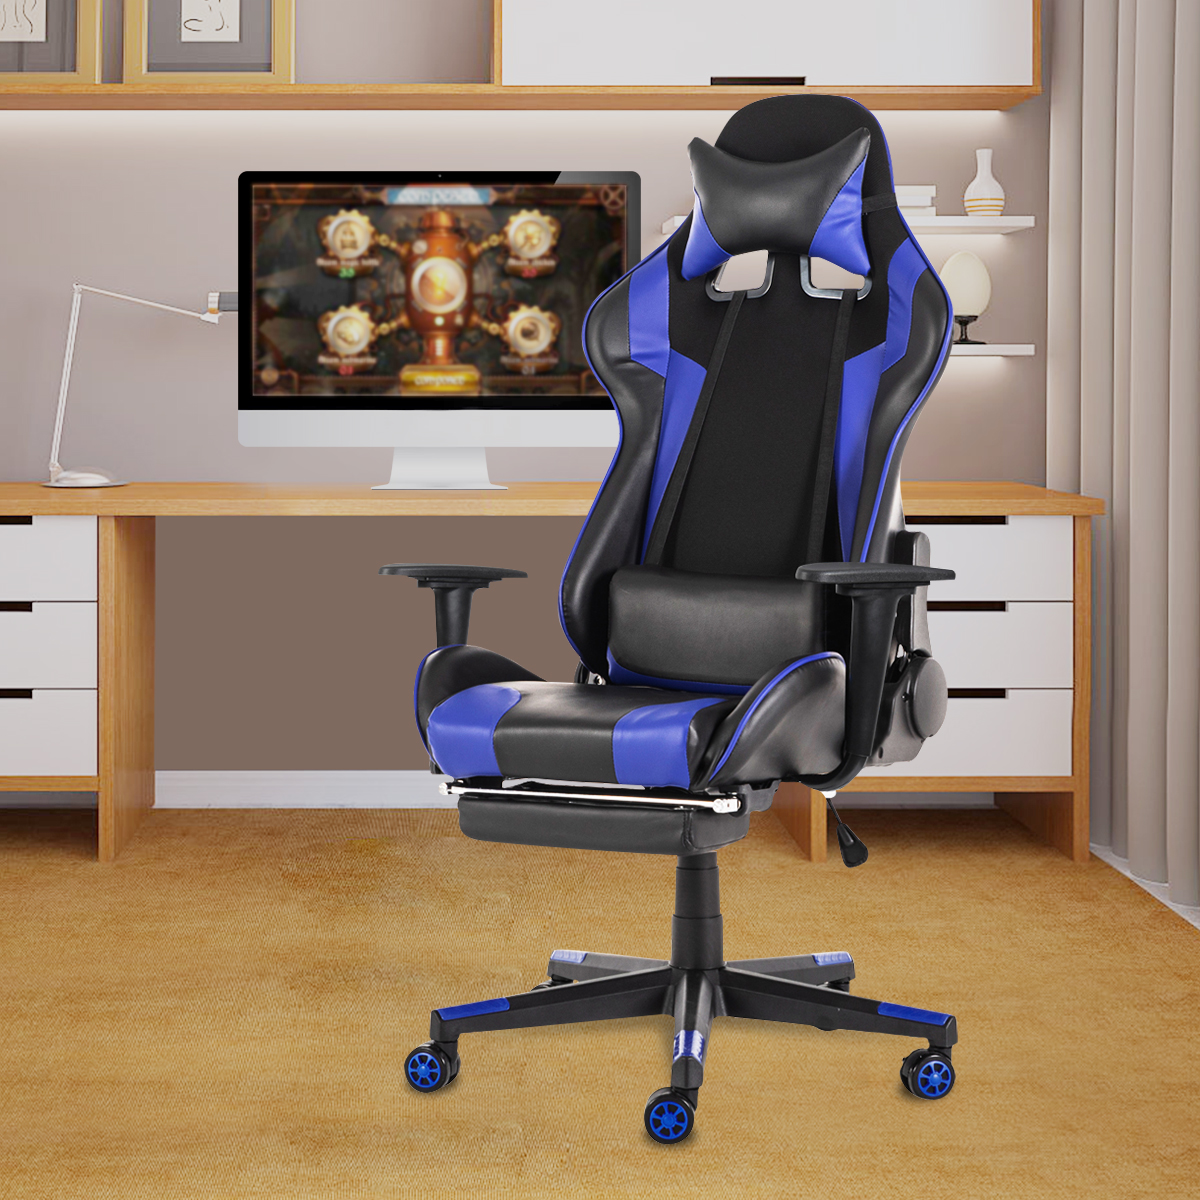 Office Computer Chair WCG Gaming Chair Reclining Leather Desk Chair Internet Cafe Gamer Chair Pink Household Armchair Footrest